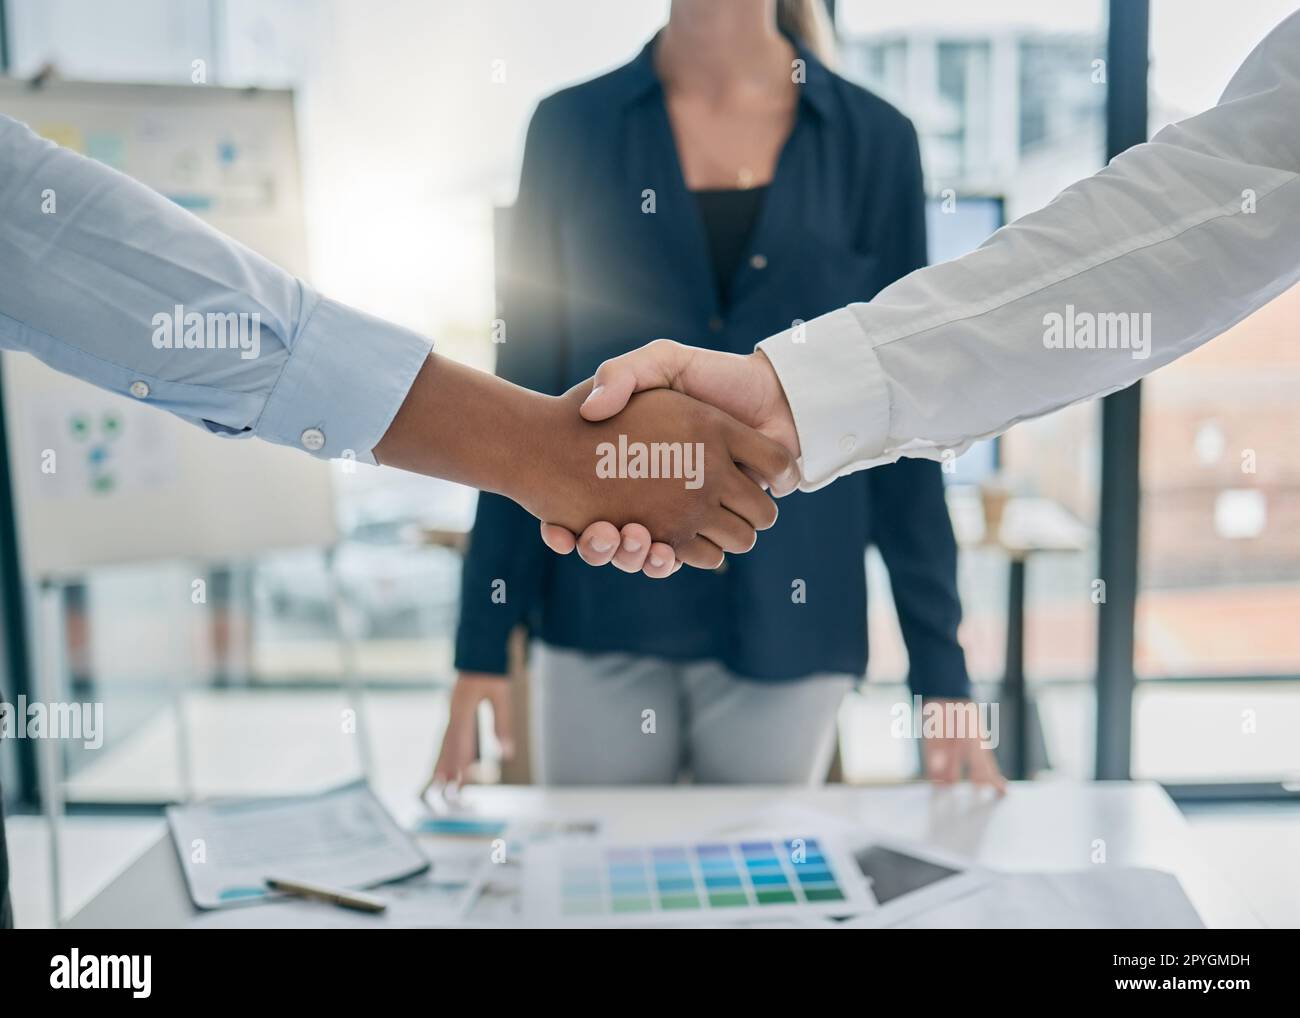 Handshake, office and business people with corporate deal, agreement or partnership with success. Meeting, professional and businessmen shaking hands for welcome, greeting or company onboarding. Stock Photo